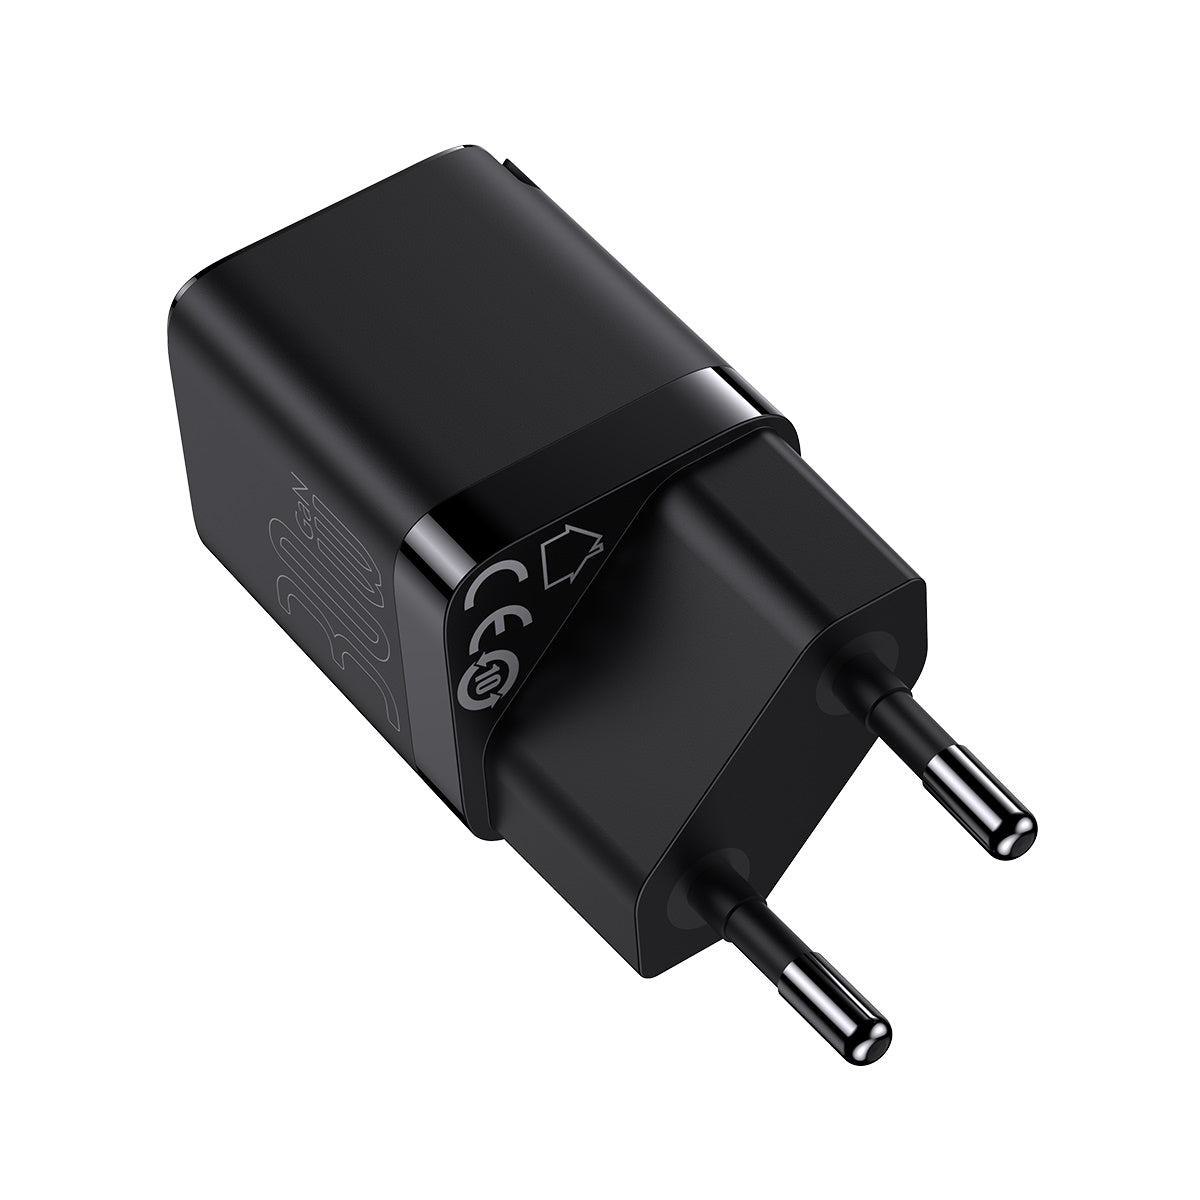 Baseus GaN3 Fast Charger 30W Black (CCGN010101)